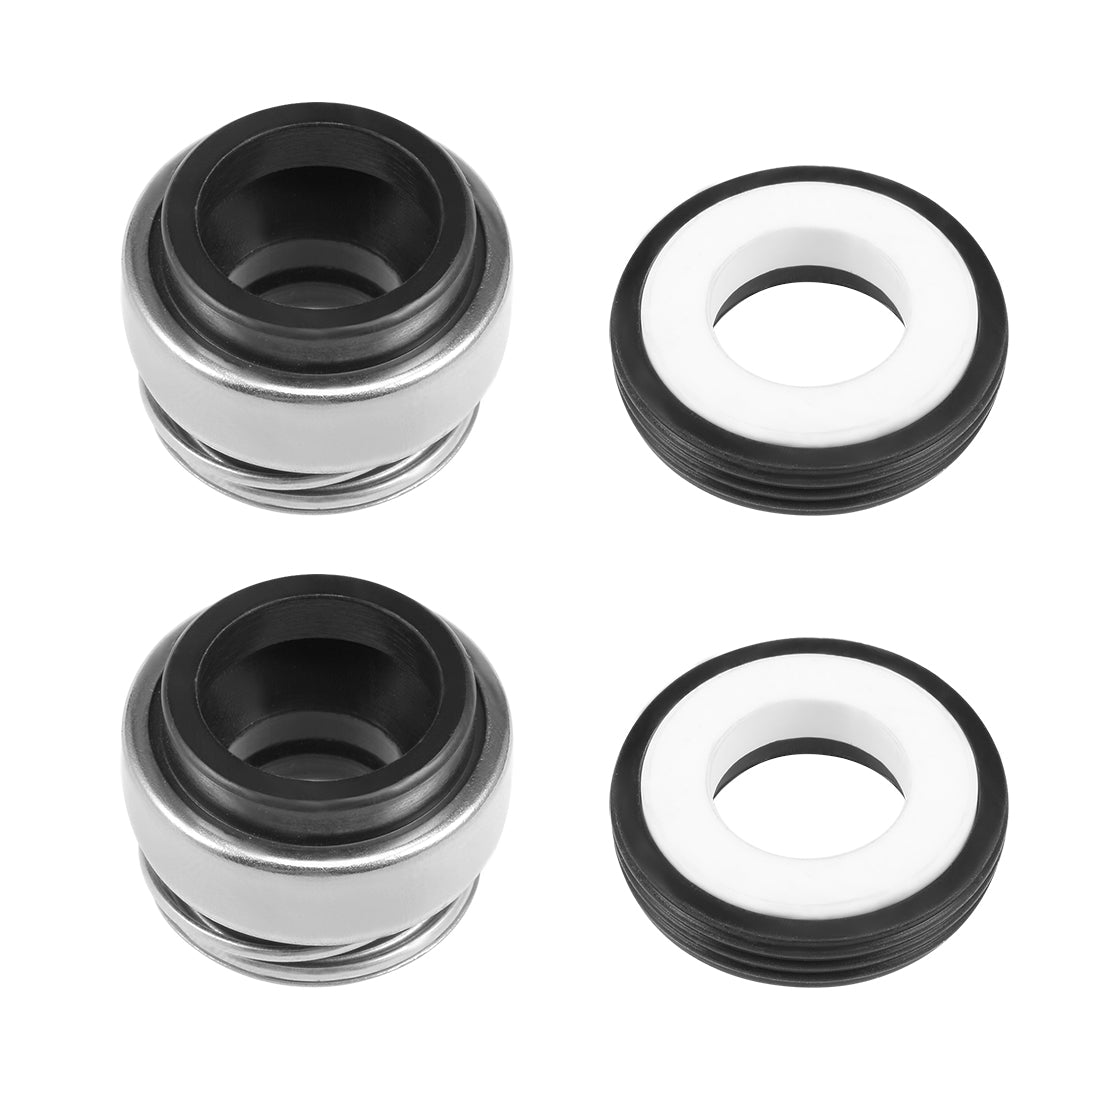 uxcell Uxcell Mechanical Shaft Seal Replacement for Pool Spa Pump 2pcs 301-12